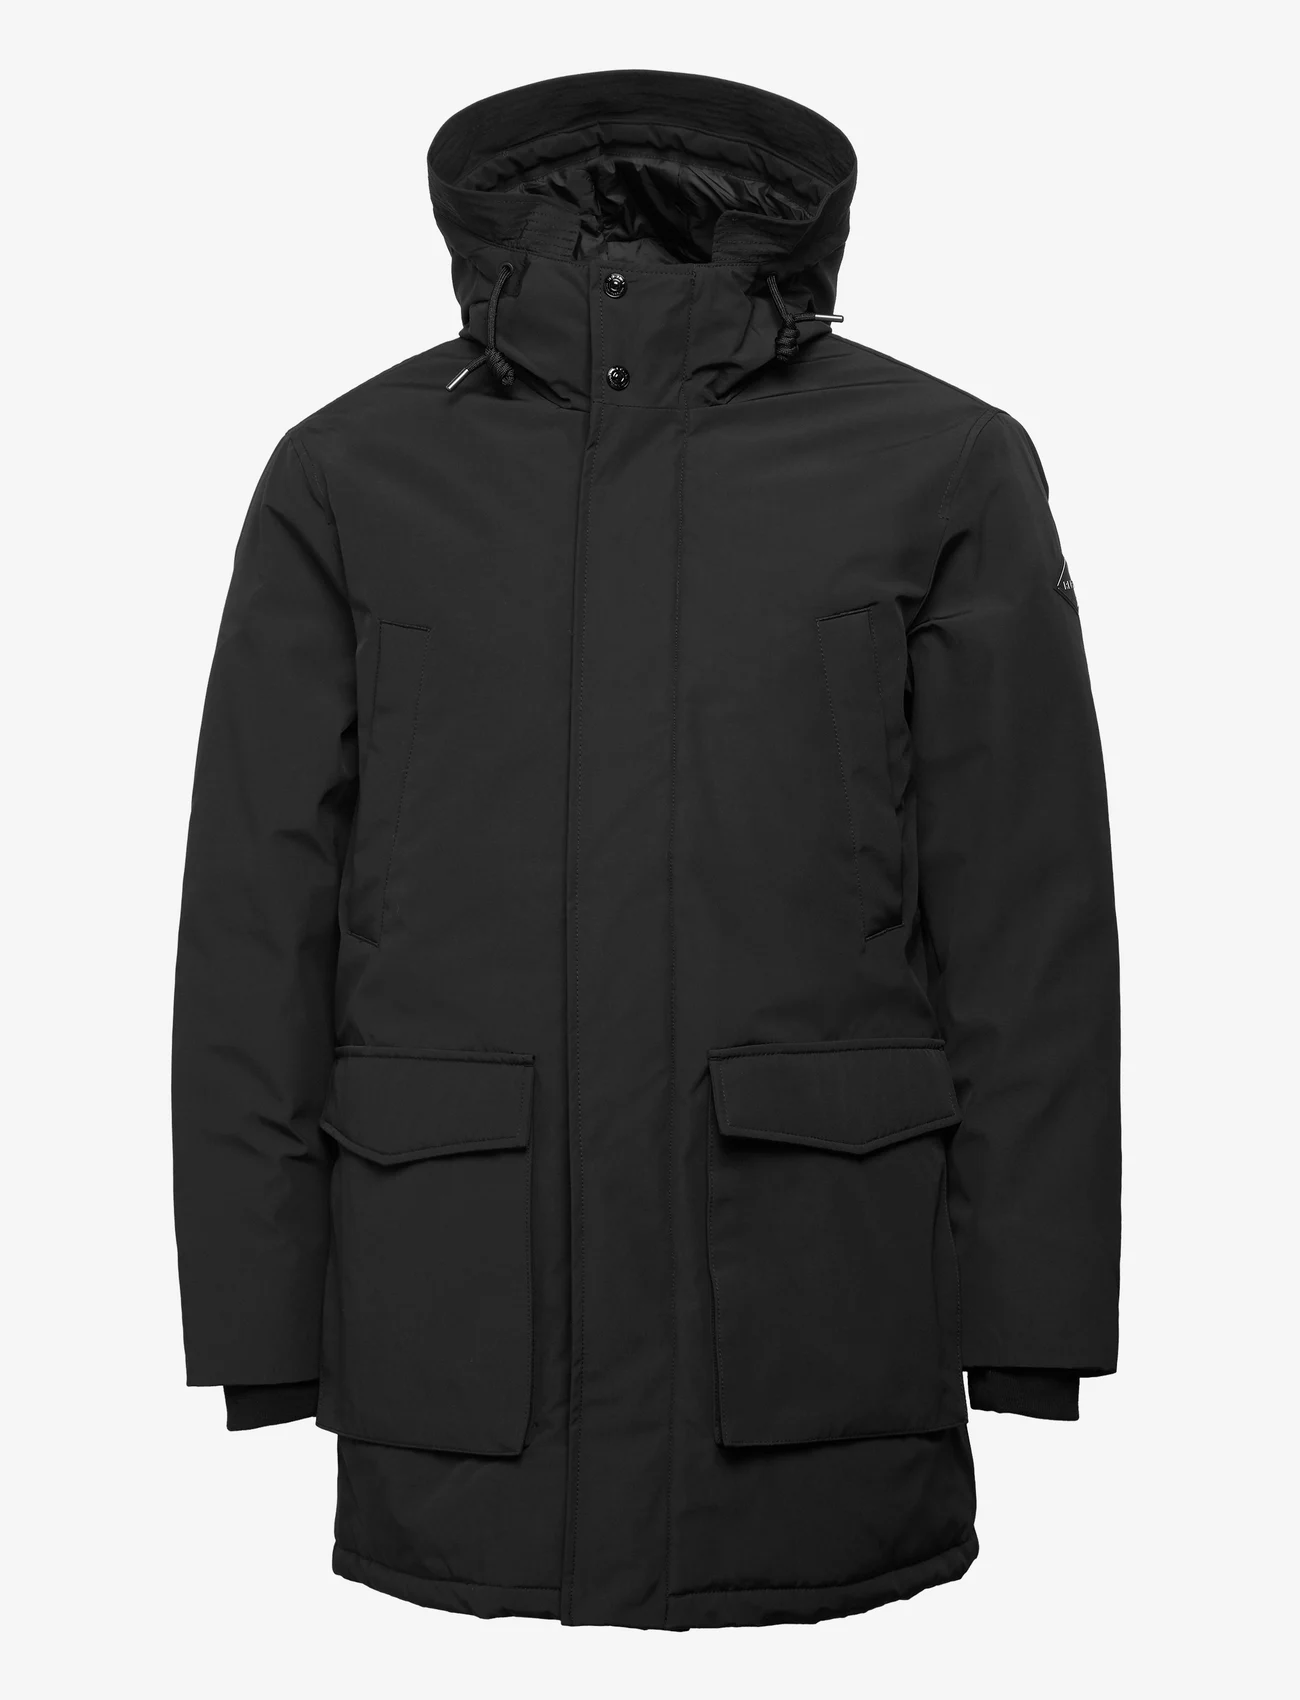 Replay - Jacket RELAXED - winter jackets - black - 0